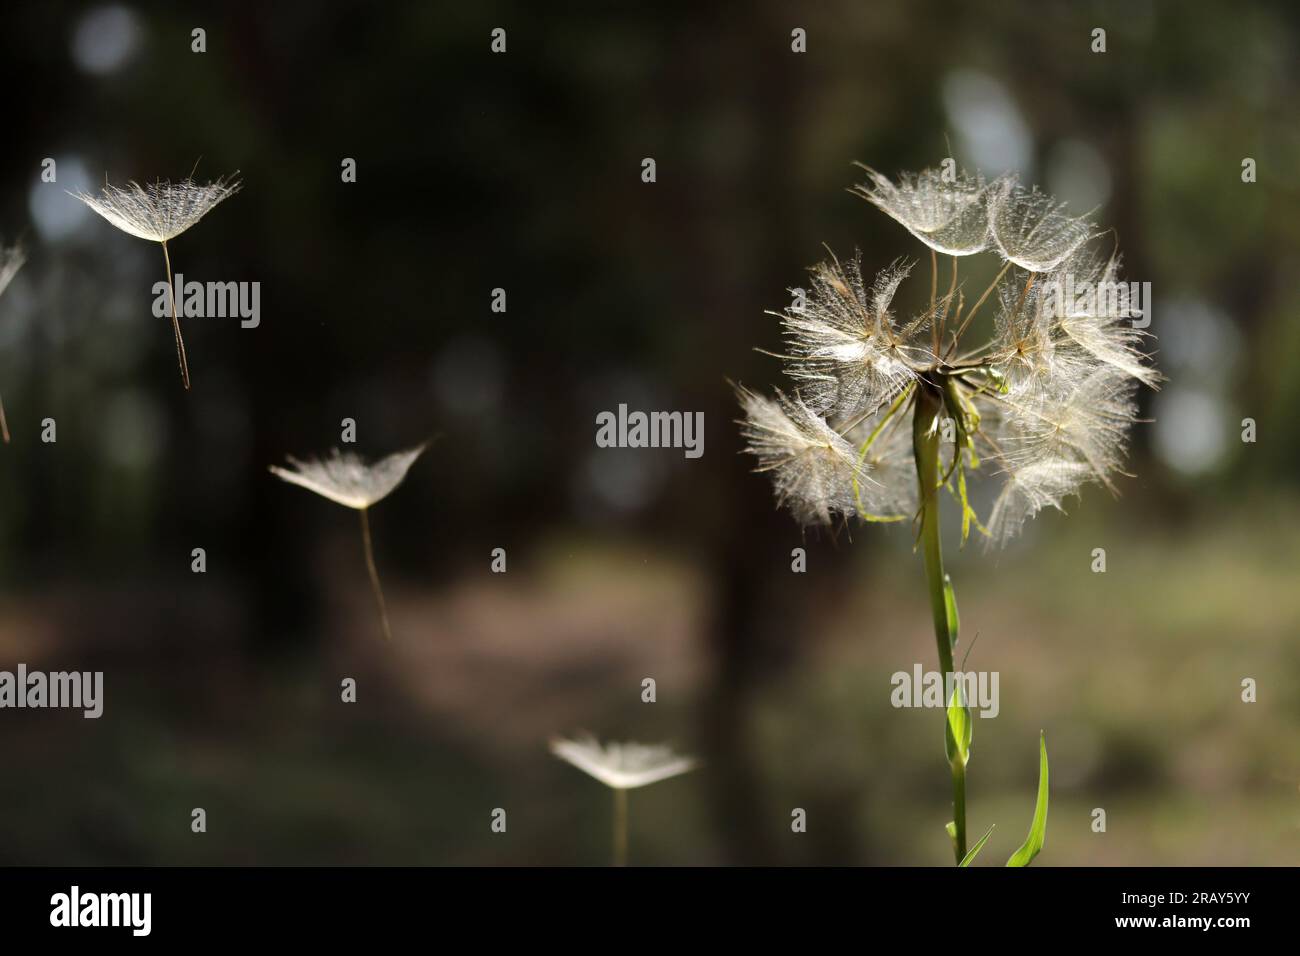 Dandelion seeds flying in nature. Stock Photo